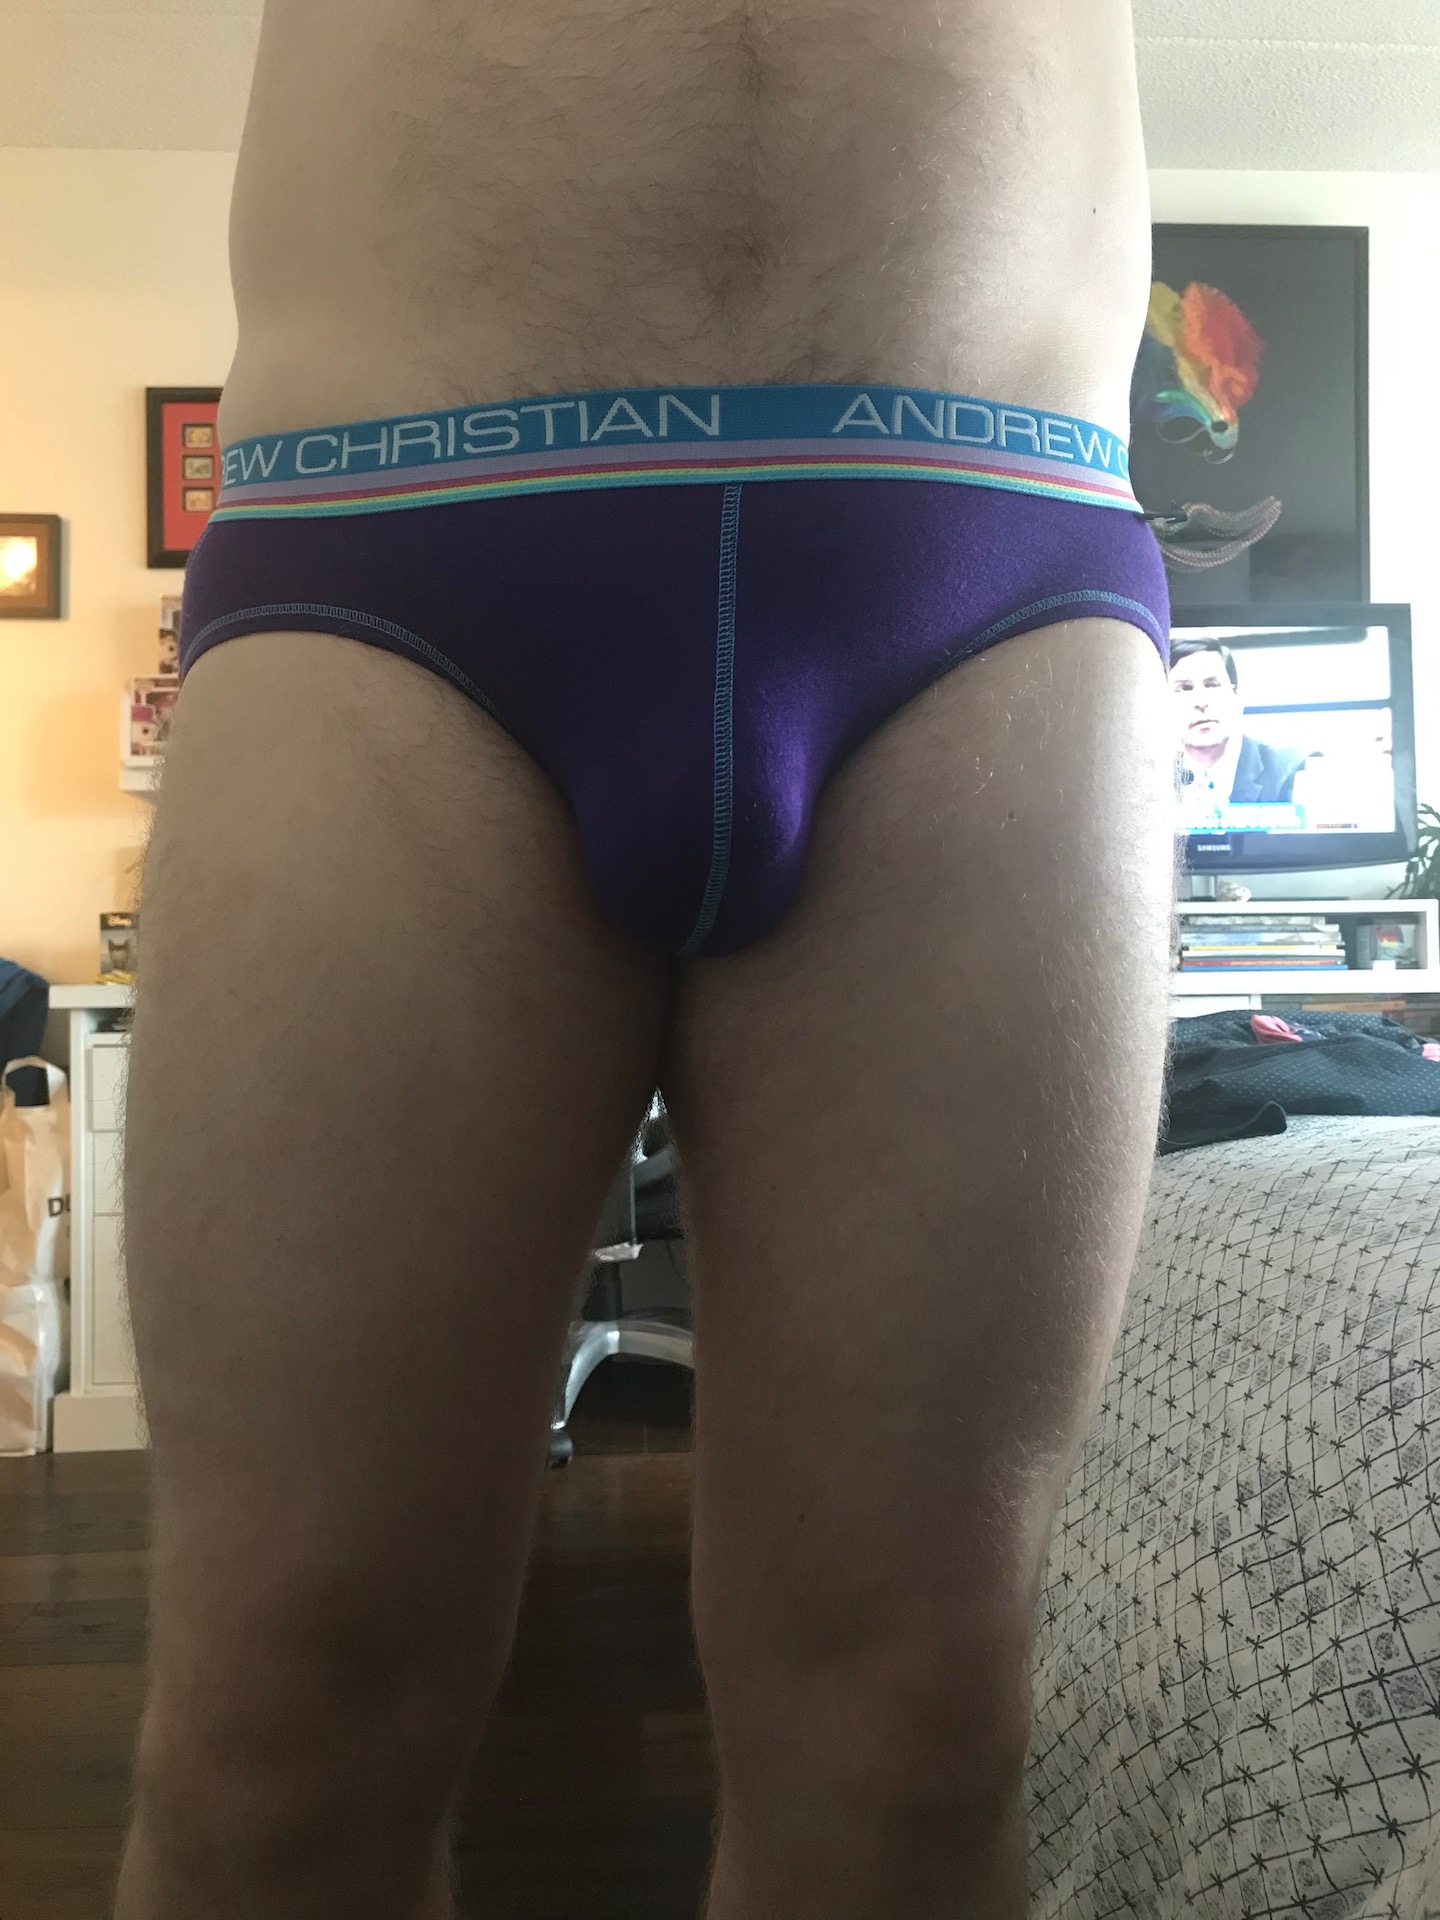 Air Jock in purple today from Andrew Christian